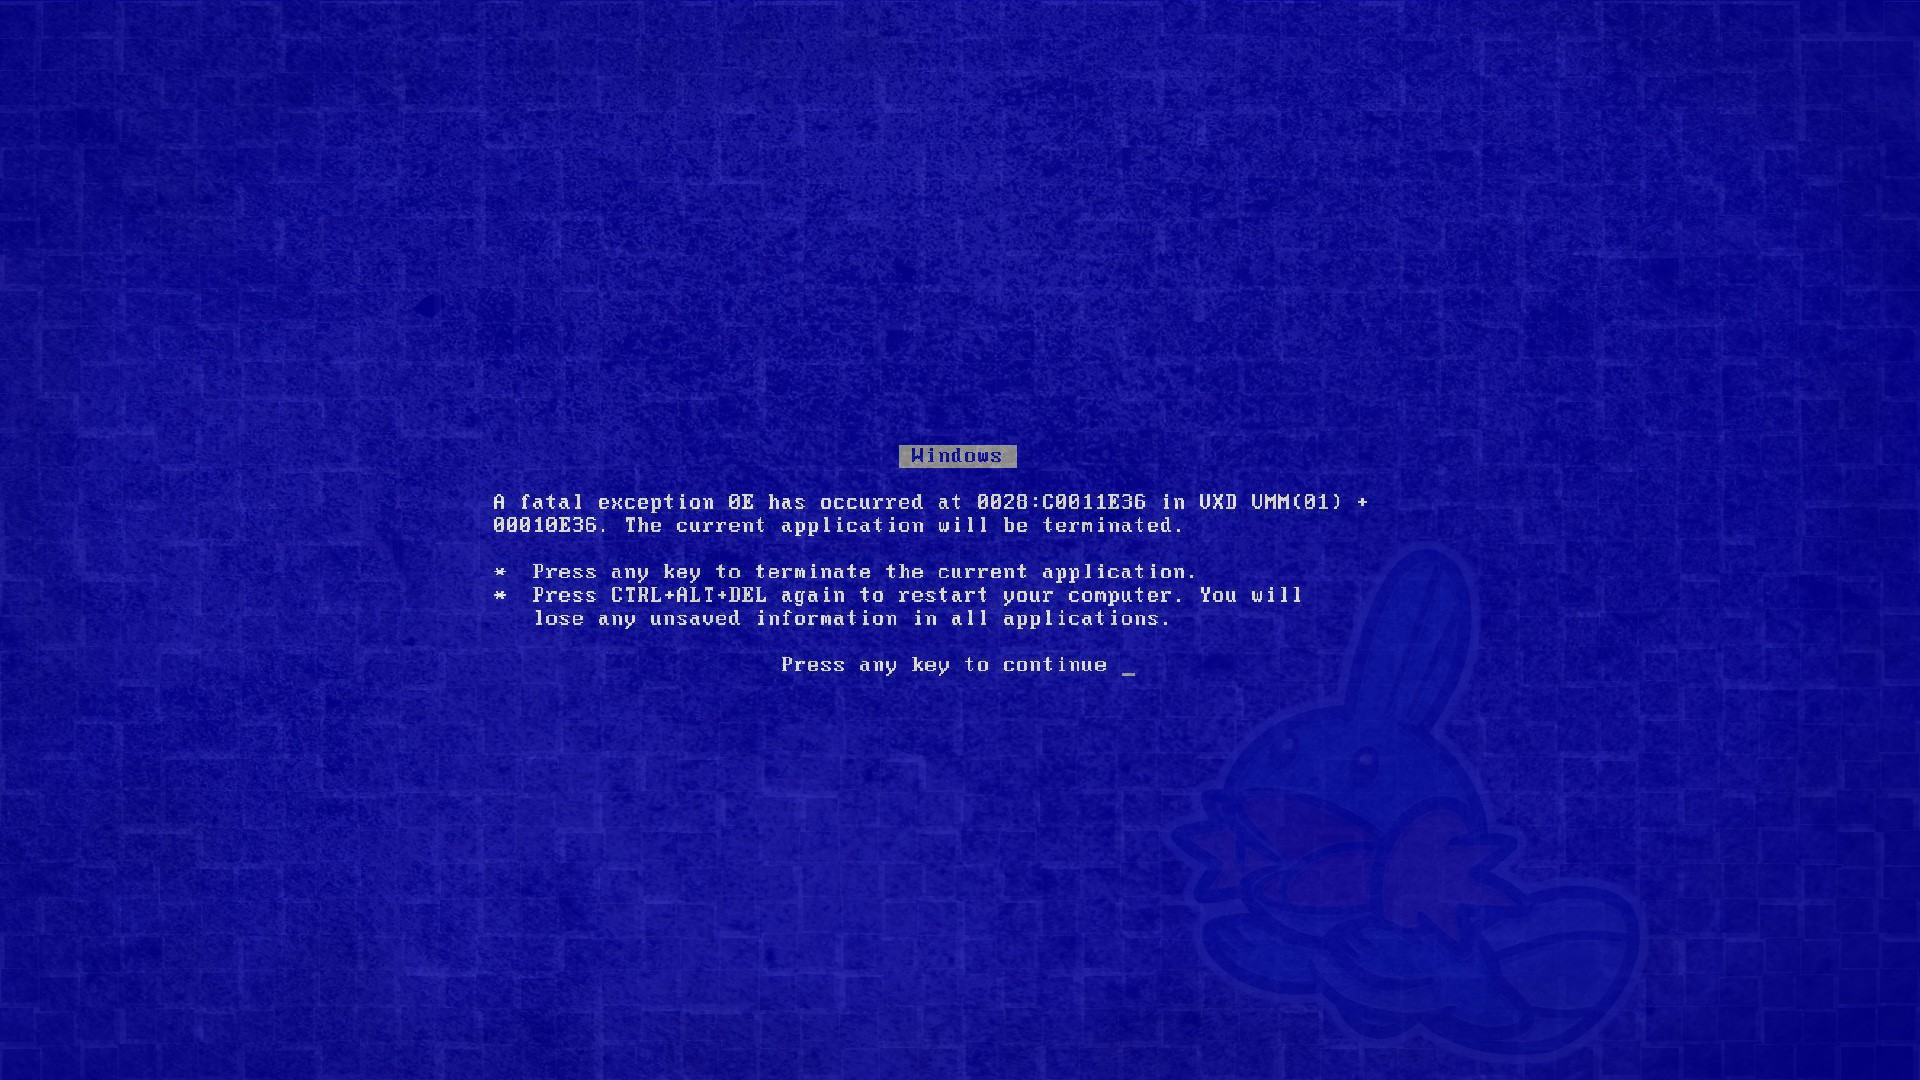 General 1920x1080 Blue Screen of Death text watermarked Windows Errors errors computer simple background blue background Microsoft Windows blue